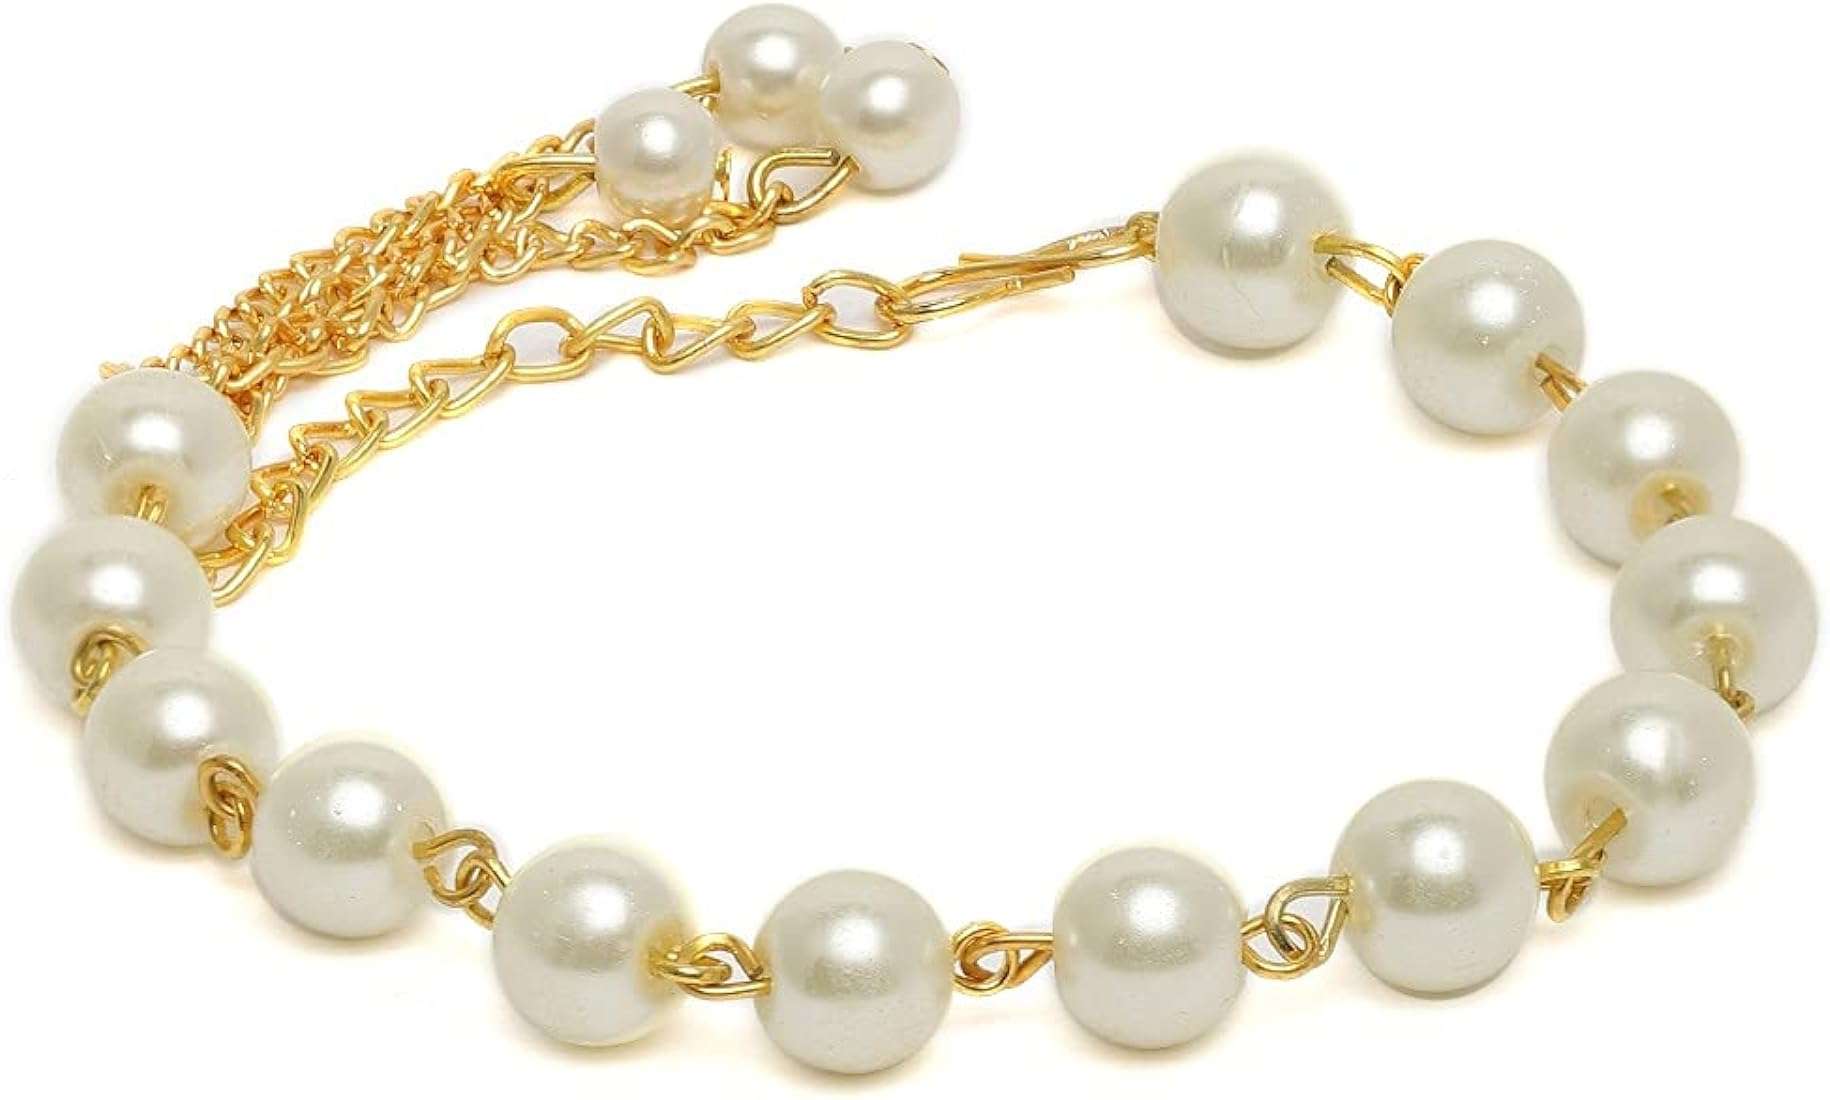 How To Make A Pearl Bracelet